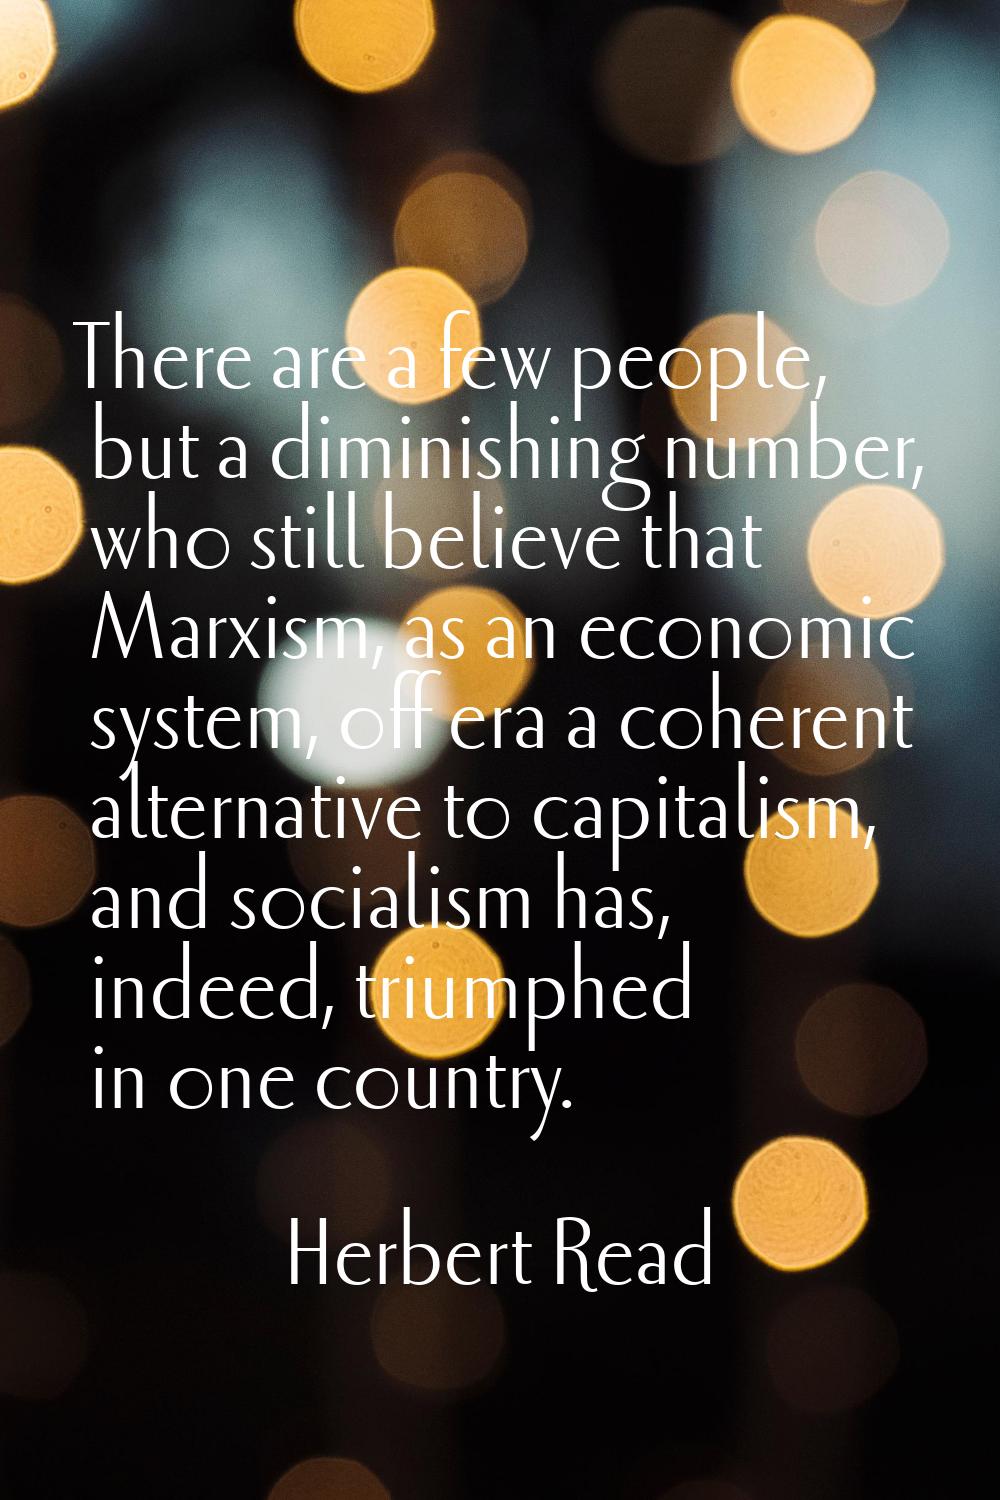 There are a few people, but a diminishing number, who still believe that Marxism, as an economic sy